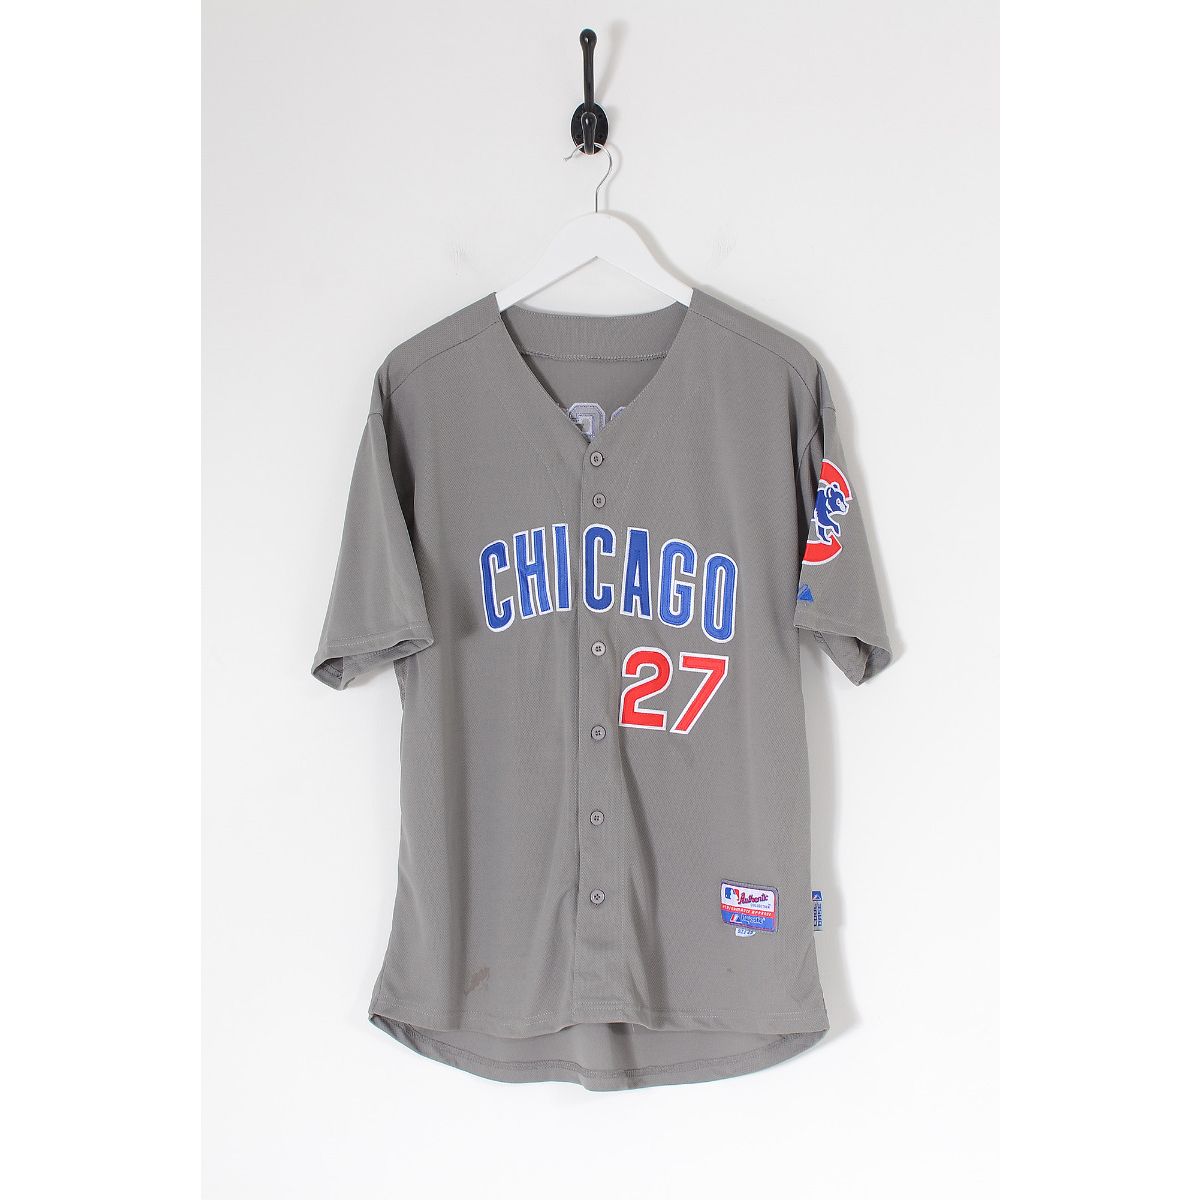 1970's chicago cubs jersey